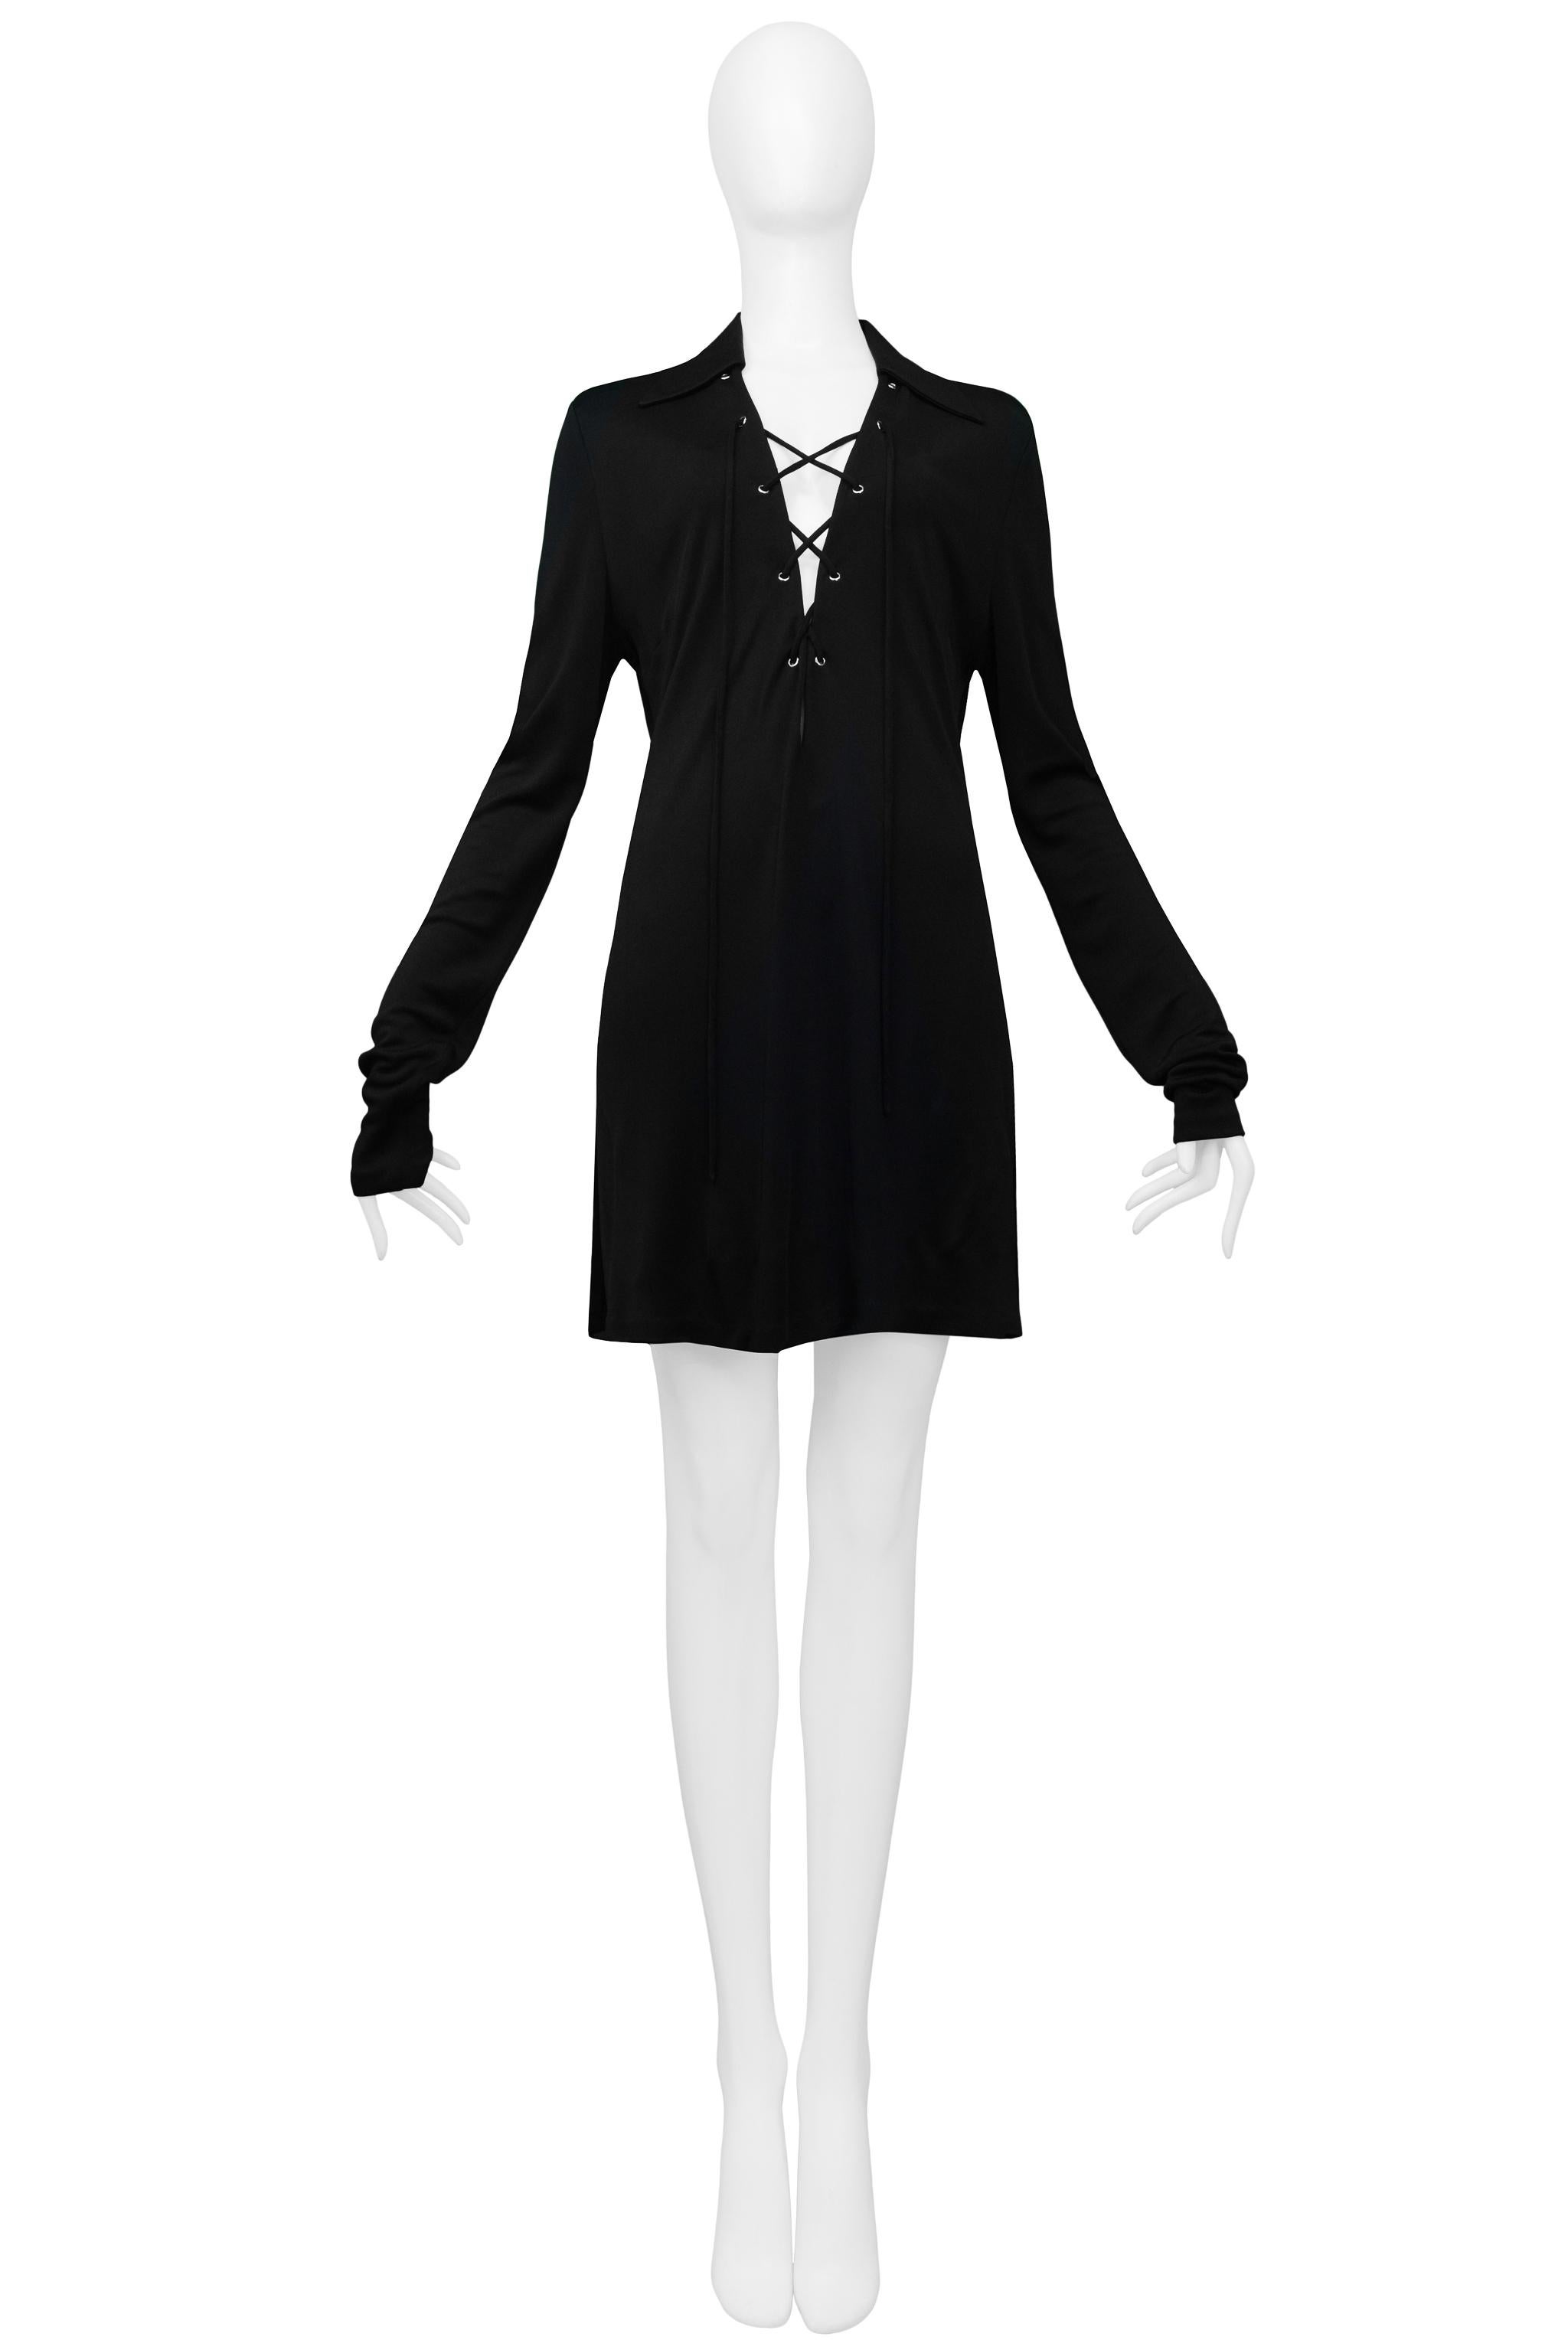 Resurrection Vintage is excited to offer a stunning vintage black Tom Ford for Gucci jersey mini-dress featuring iconic Safari-style lace front, wide collar, extra-long sleeves, and side slits. 

Gucci
Designed by Tom Ford
Size 46
Jersey
1996